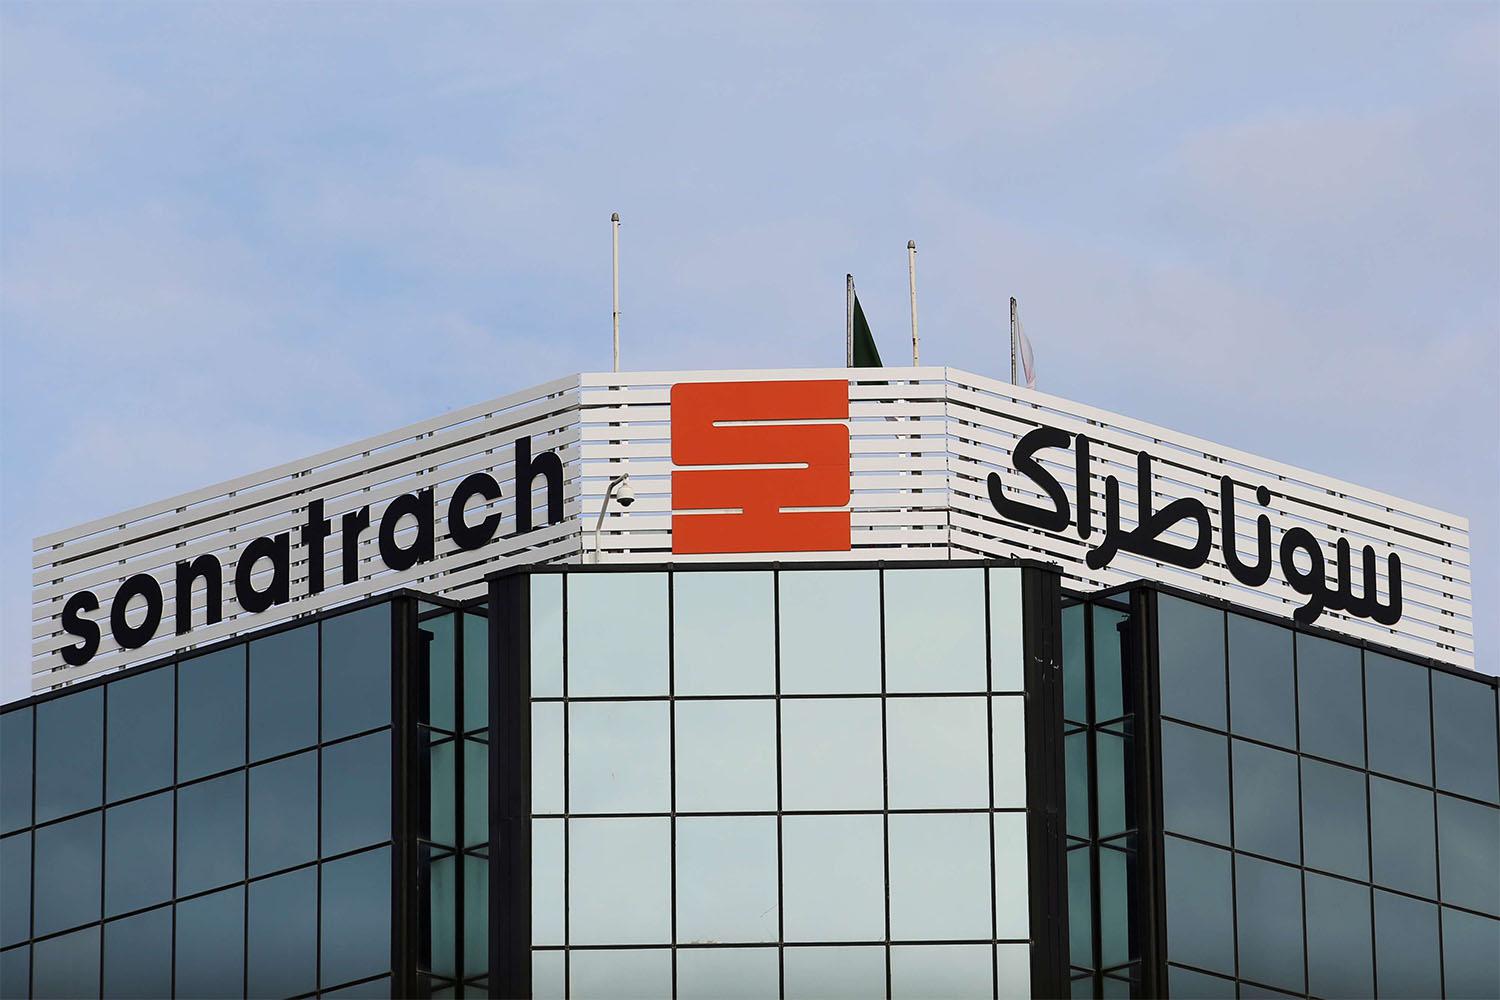 Ould Kaddour had been chief executive of Sonatrach from March 2017 to April 2019